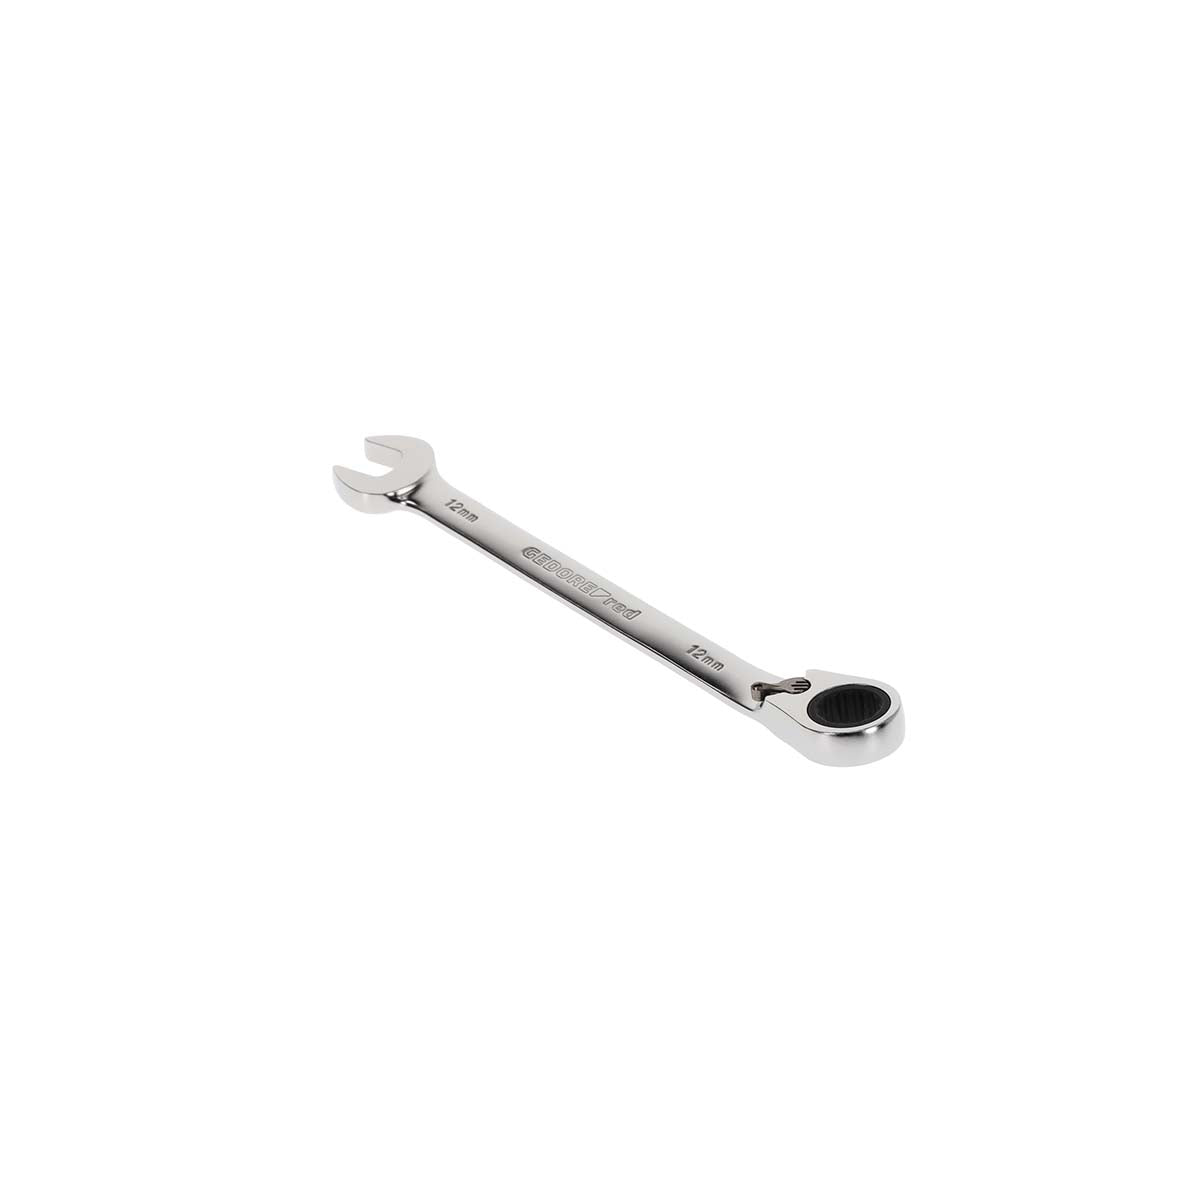 GEDORE red R07200120 - Ratchet combination wrench with shift lever, 12 mm L=167 mm (3300855)